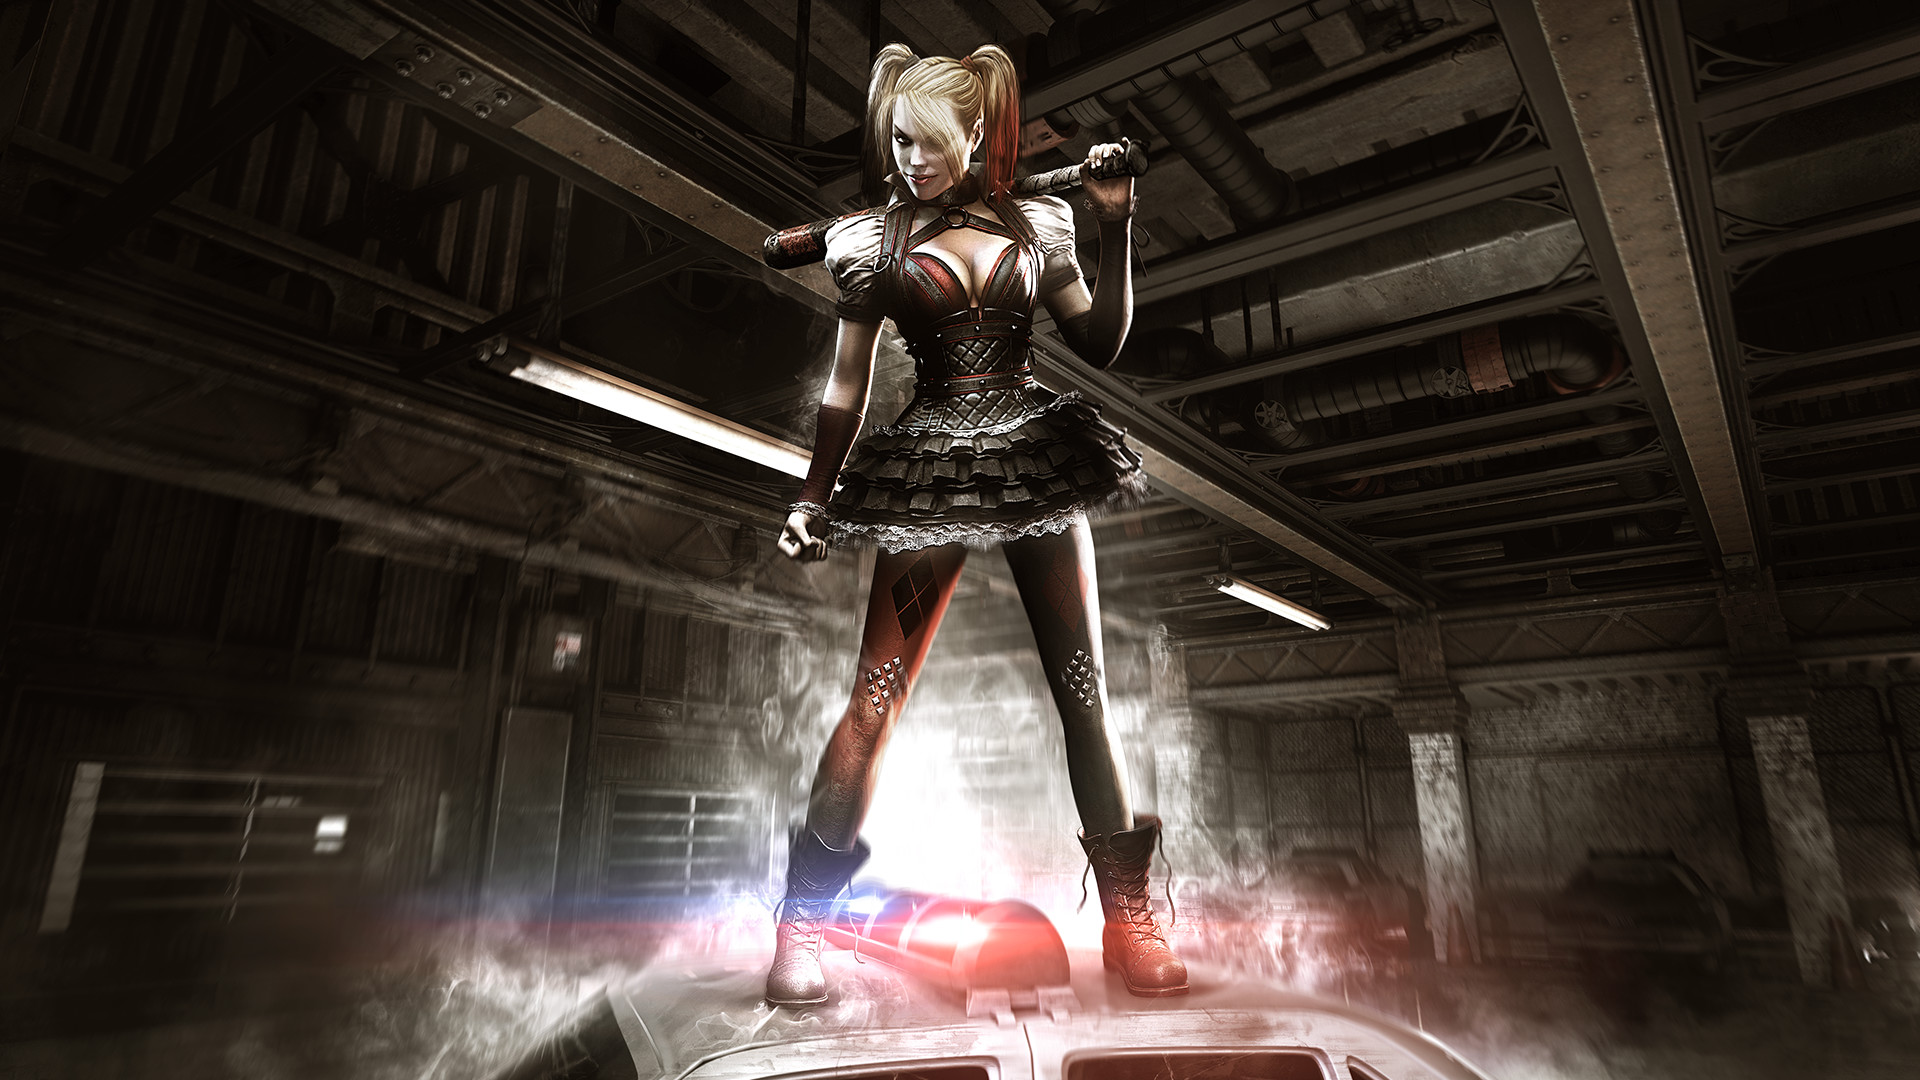 General 1920x1080 Harley Quinn Batman: Arkham Knight Batman video games women Rocksteady Studios DC Comics baseball bat looking at viewer standing video game girls twintails smiling closed mouth police cars boots